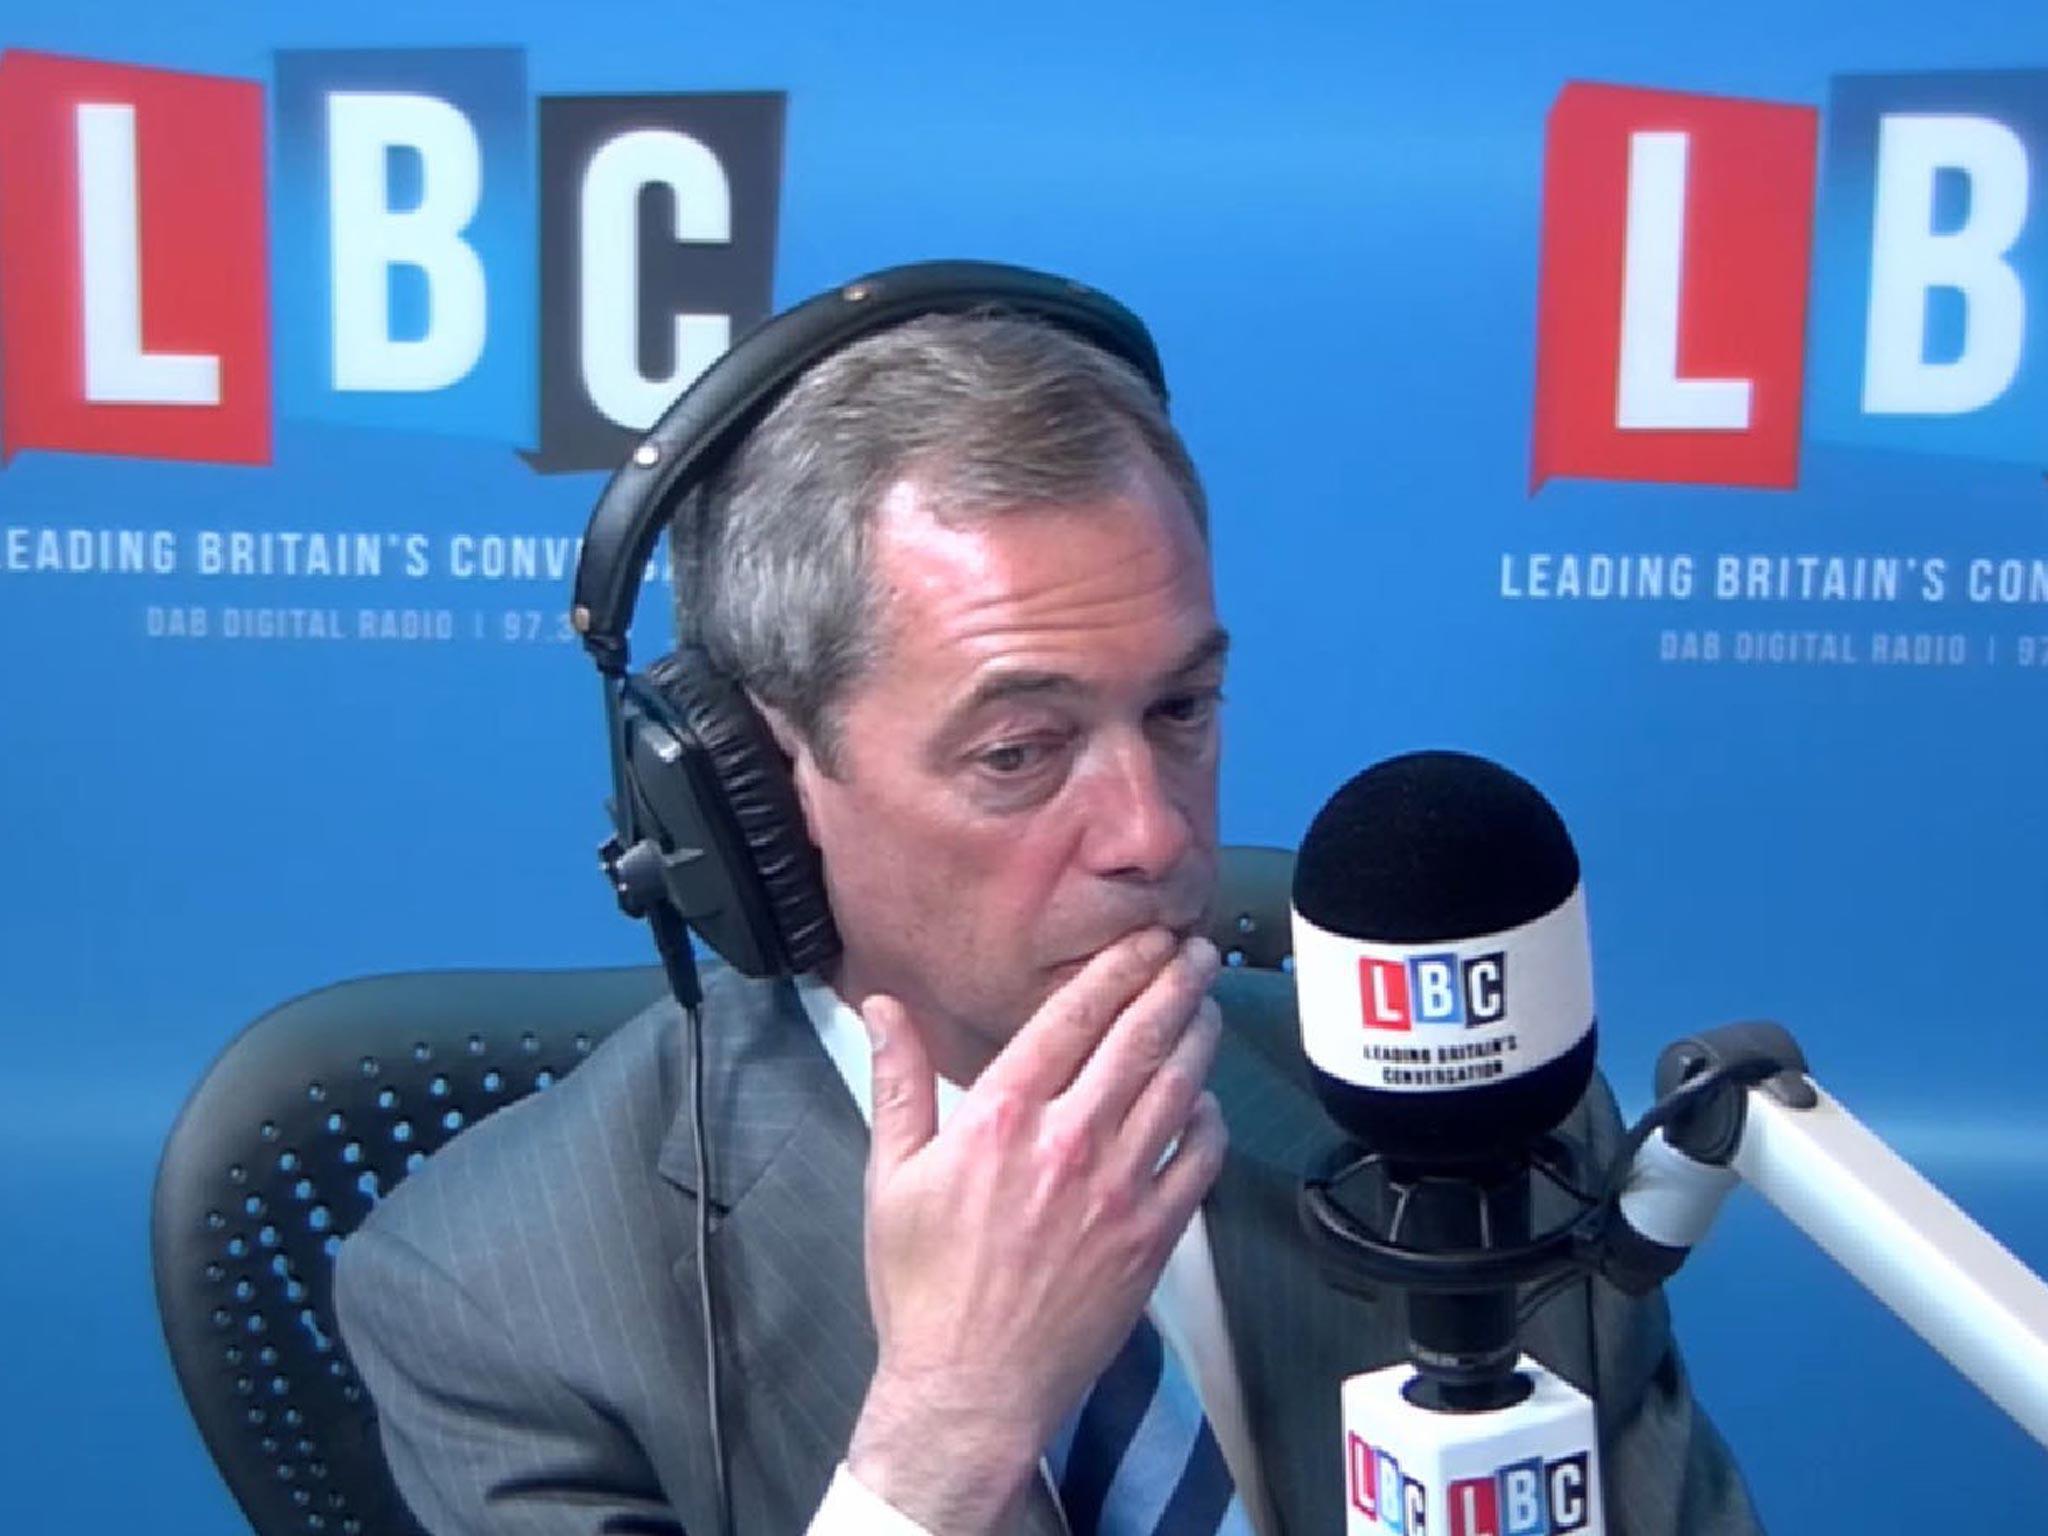 Nigel Farage was confronted by an angry HIV patient live on LBC over remarks he made suggested HIV positive migrants should be prevented from entering the UK